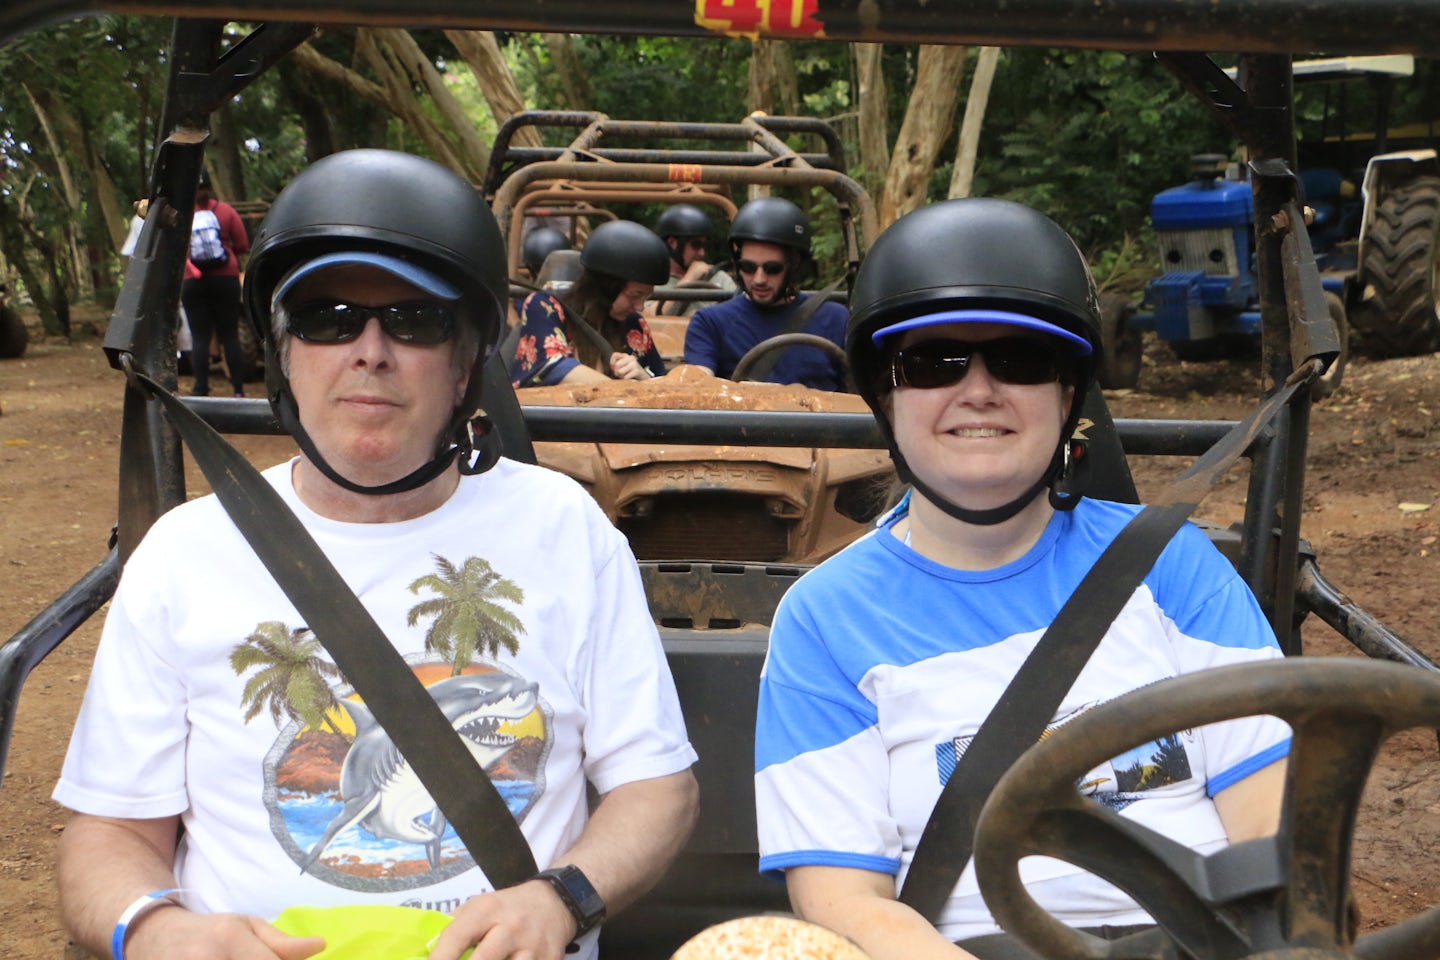 Dune Buggy Excursion with Royal Caribbean in Jamaica - had a great ride!